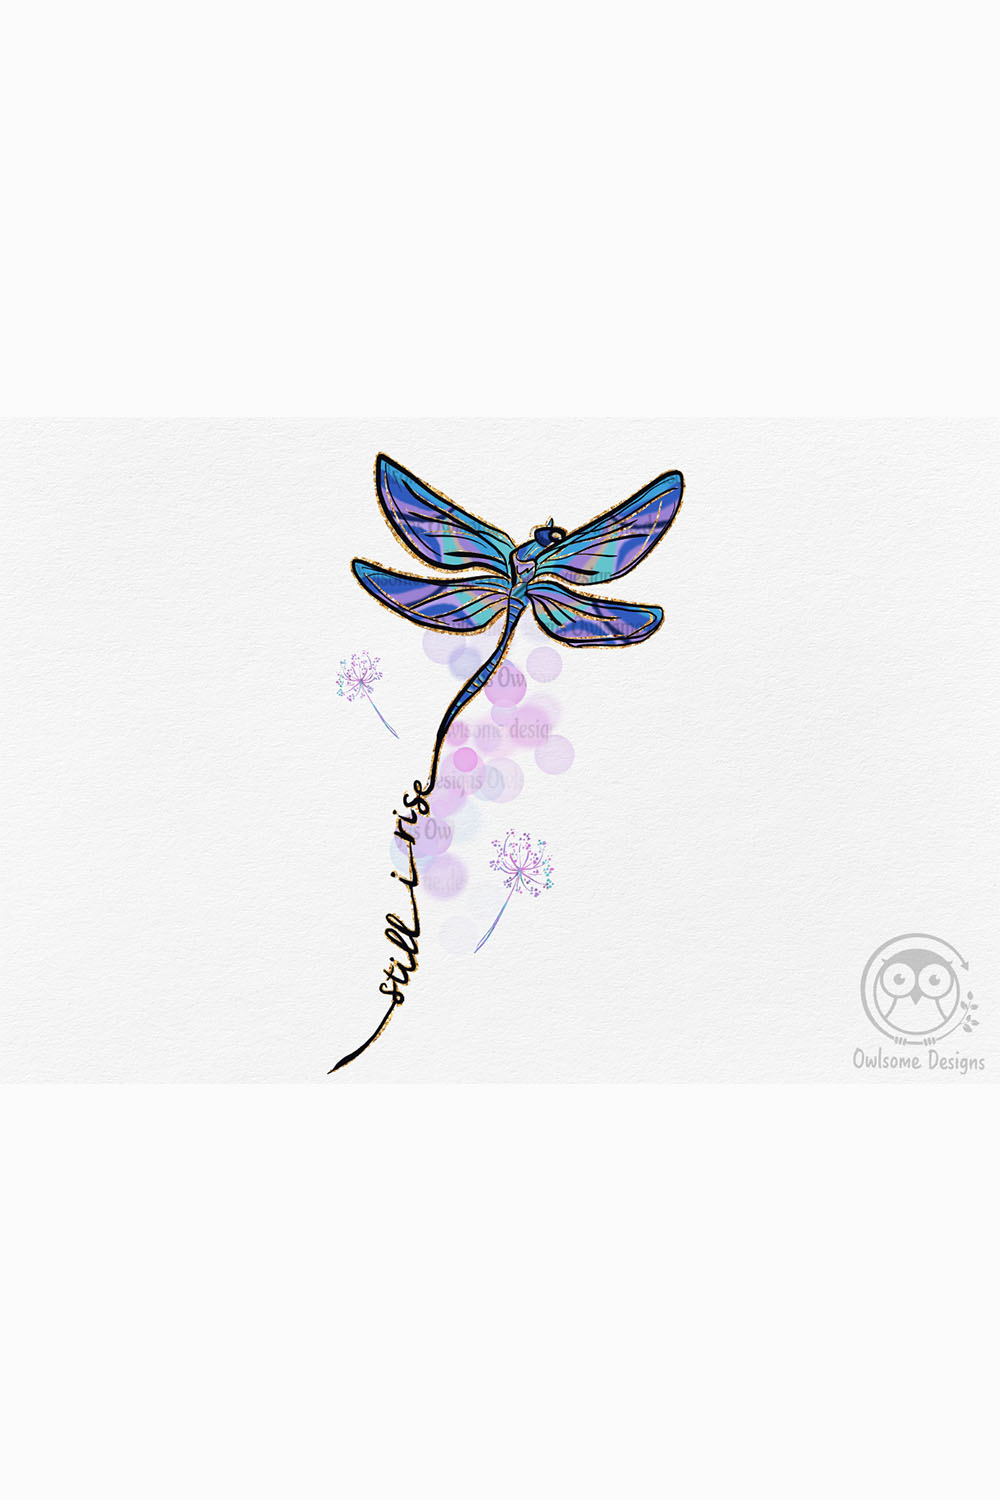 Enchanting image with a dragonfly and an inscription.